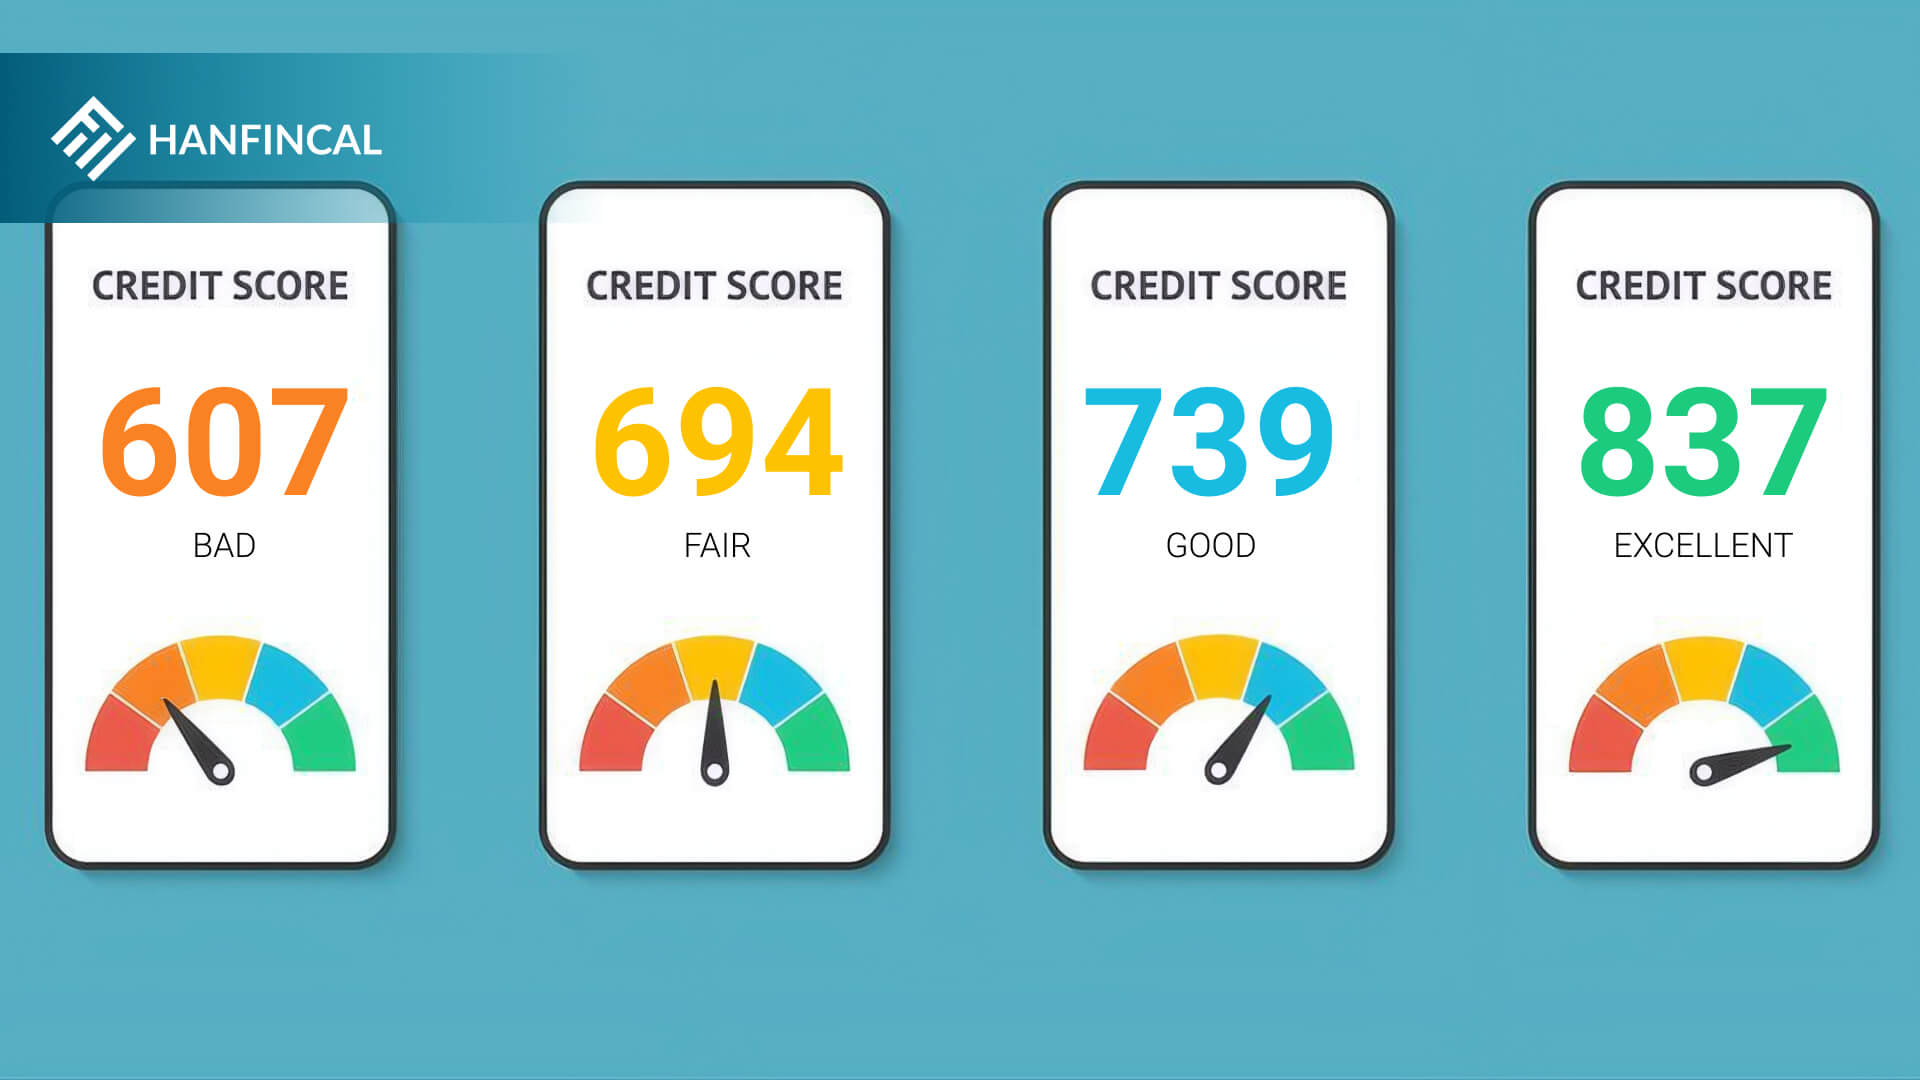 What is considered a good credit score?